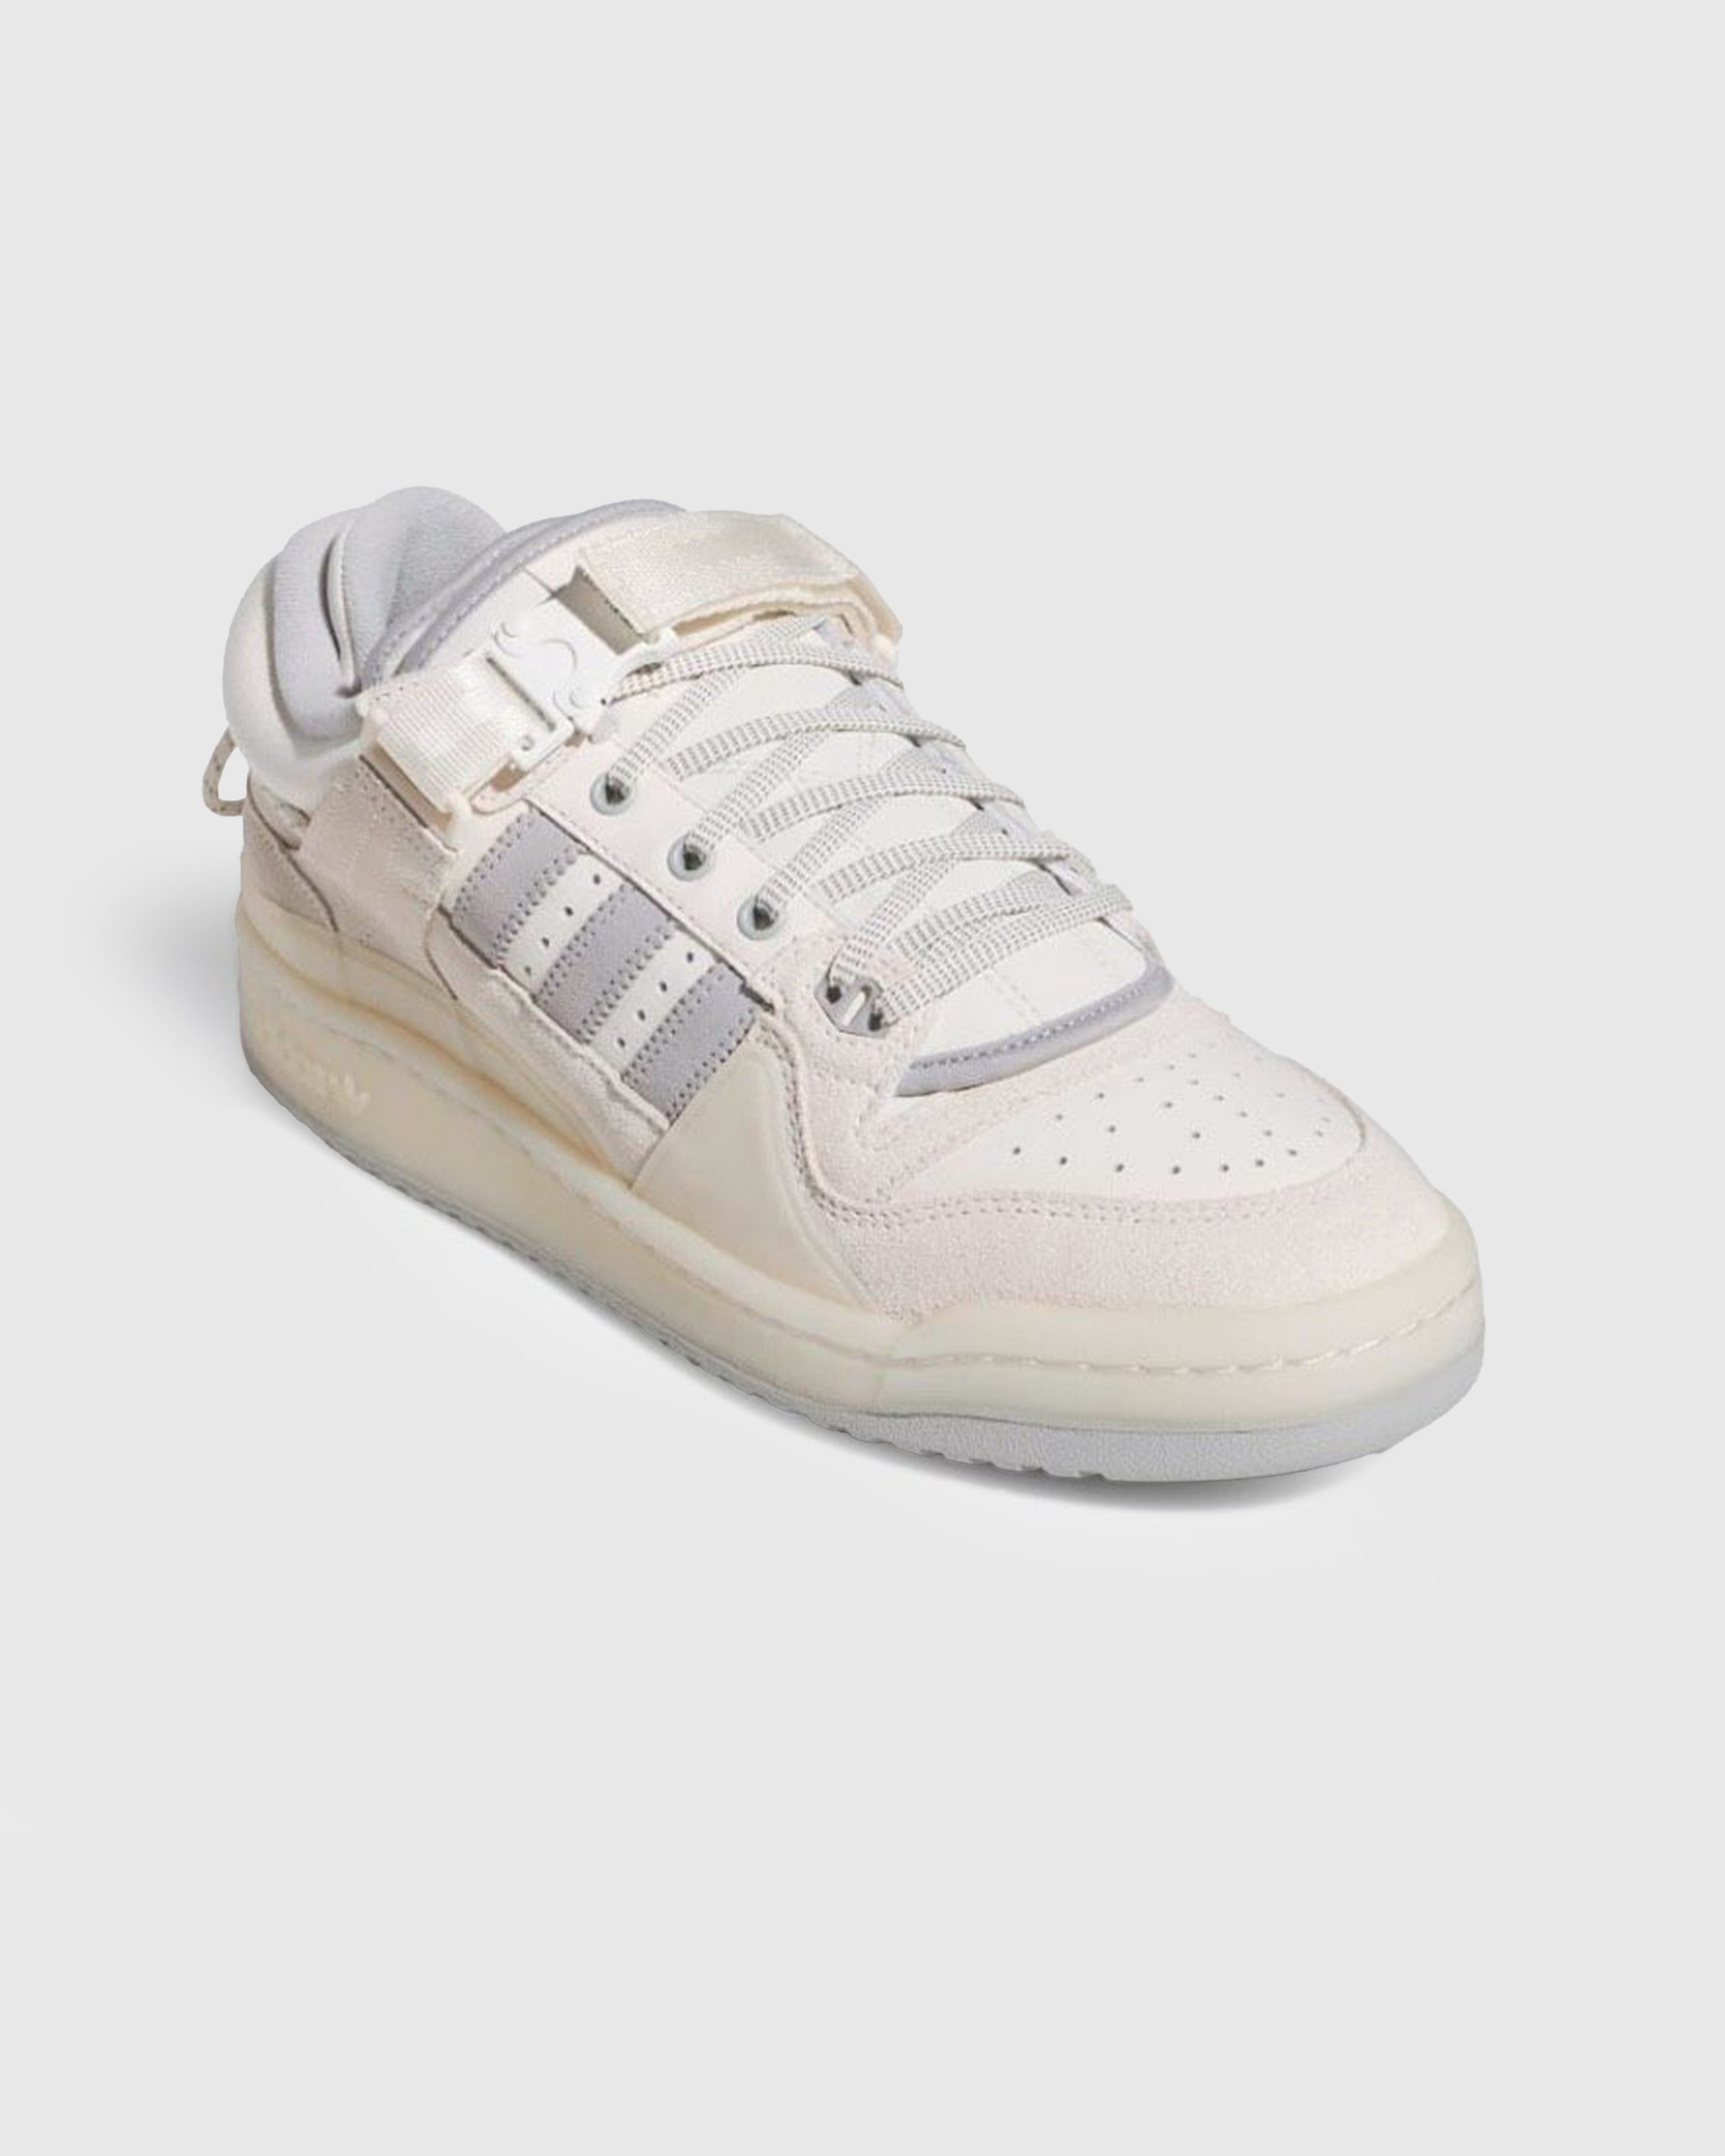 Adidas x Bad Bunny - Forum Low Cloud White/Clear Onix/Chalk White - Footwear - White - Image 5